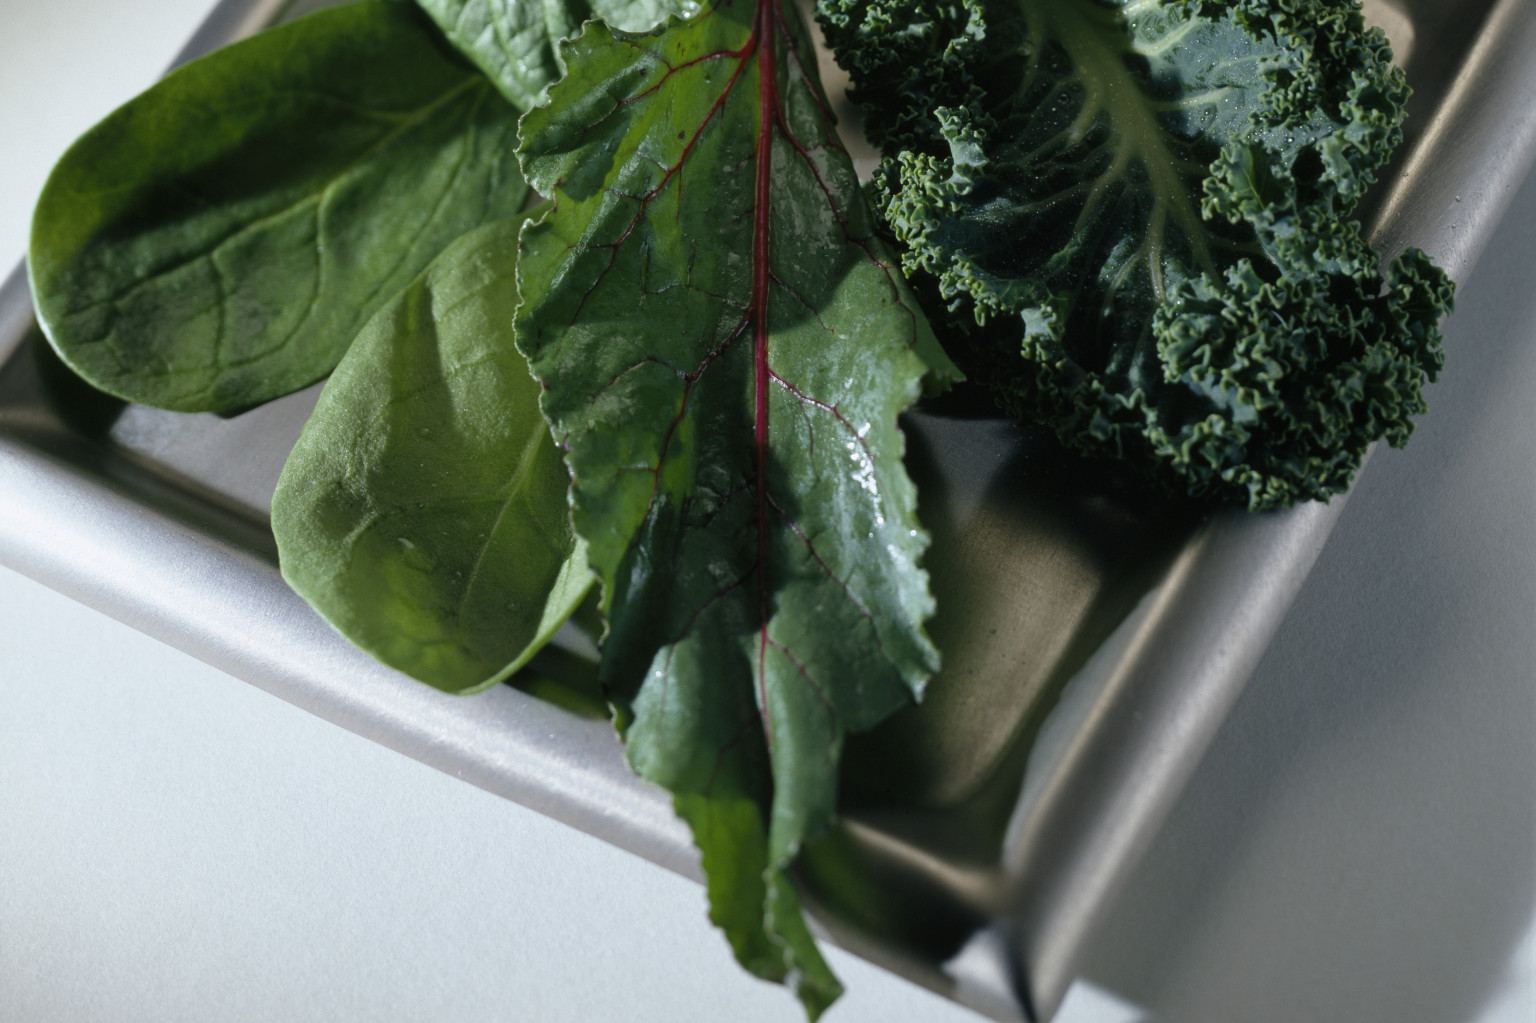 Kale vs Spinach: Which Is Healthier?